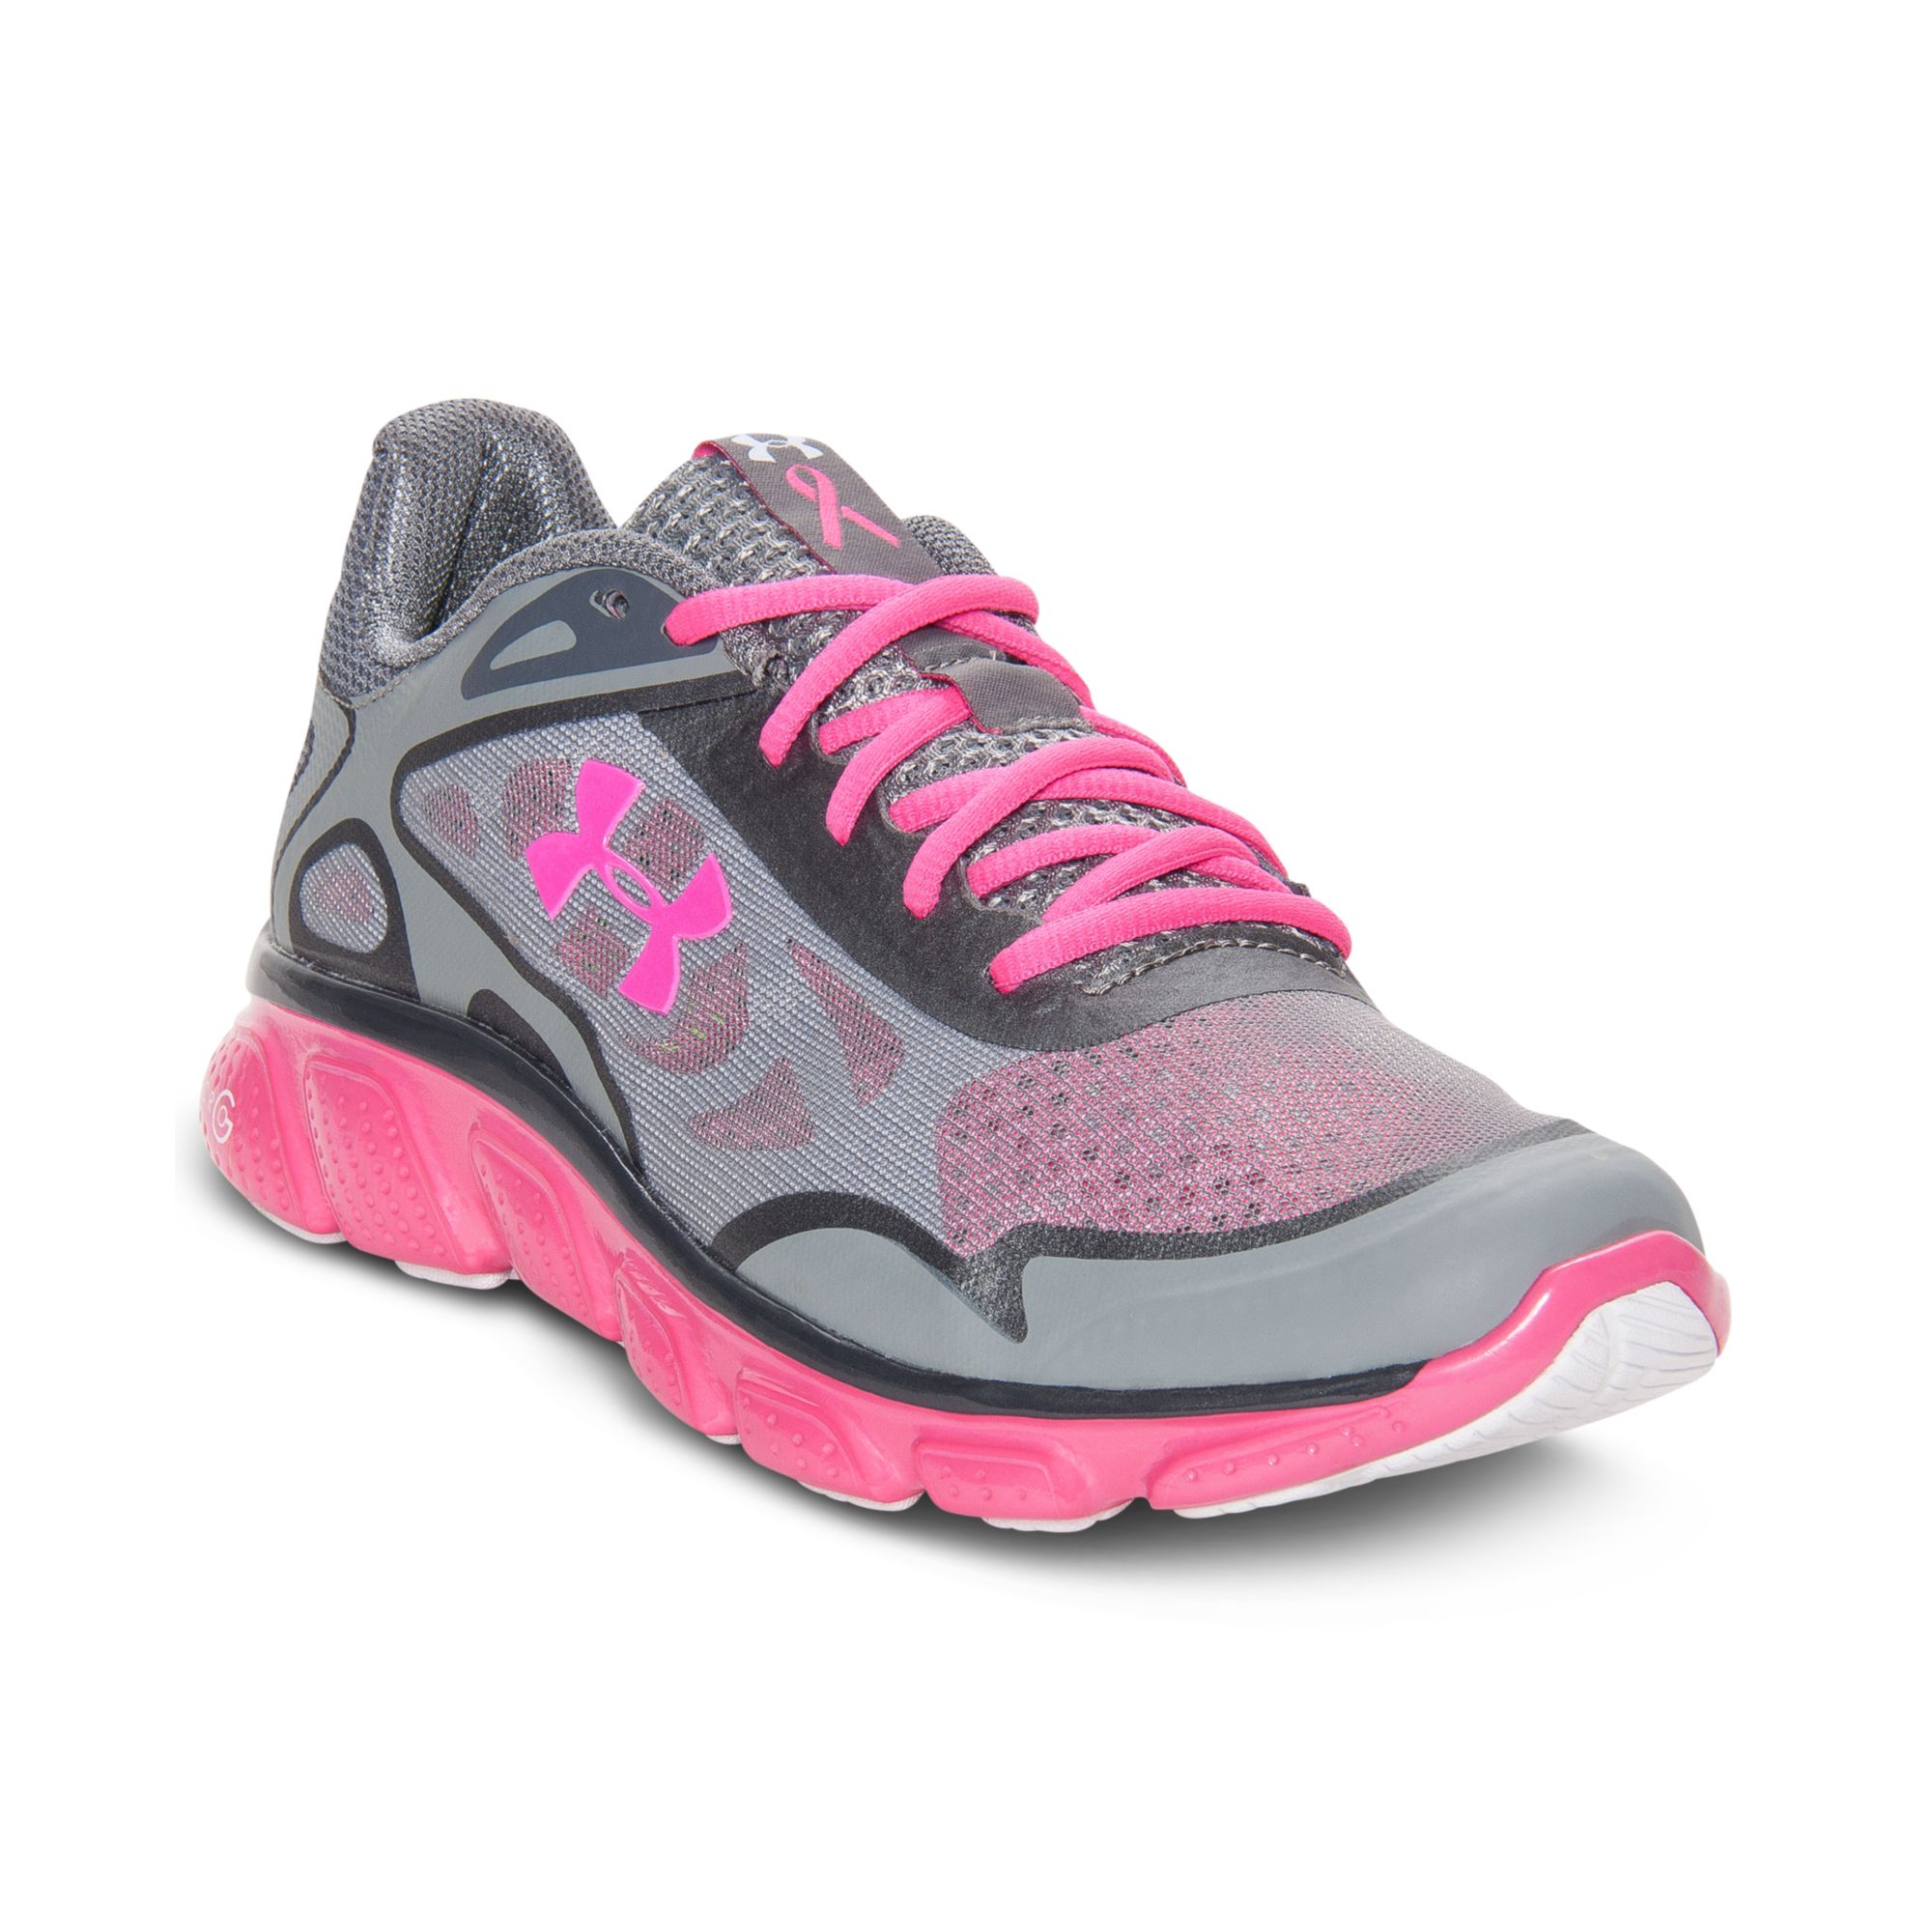 Under Armour Women'S Pulse Running Sneakers From Finish Line in